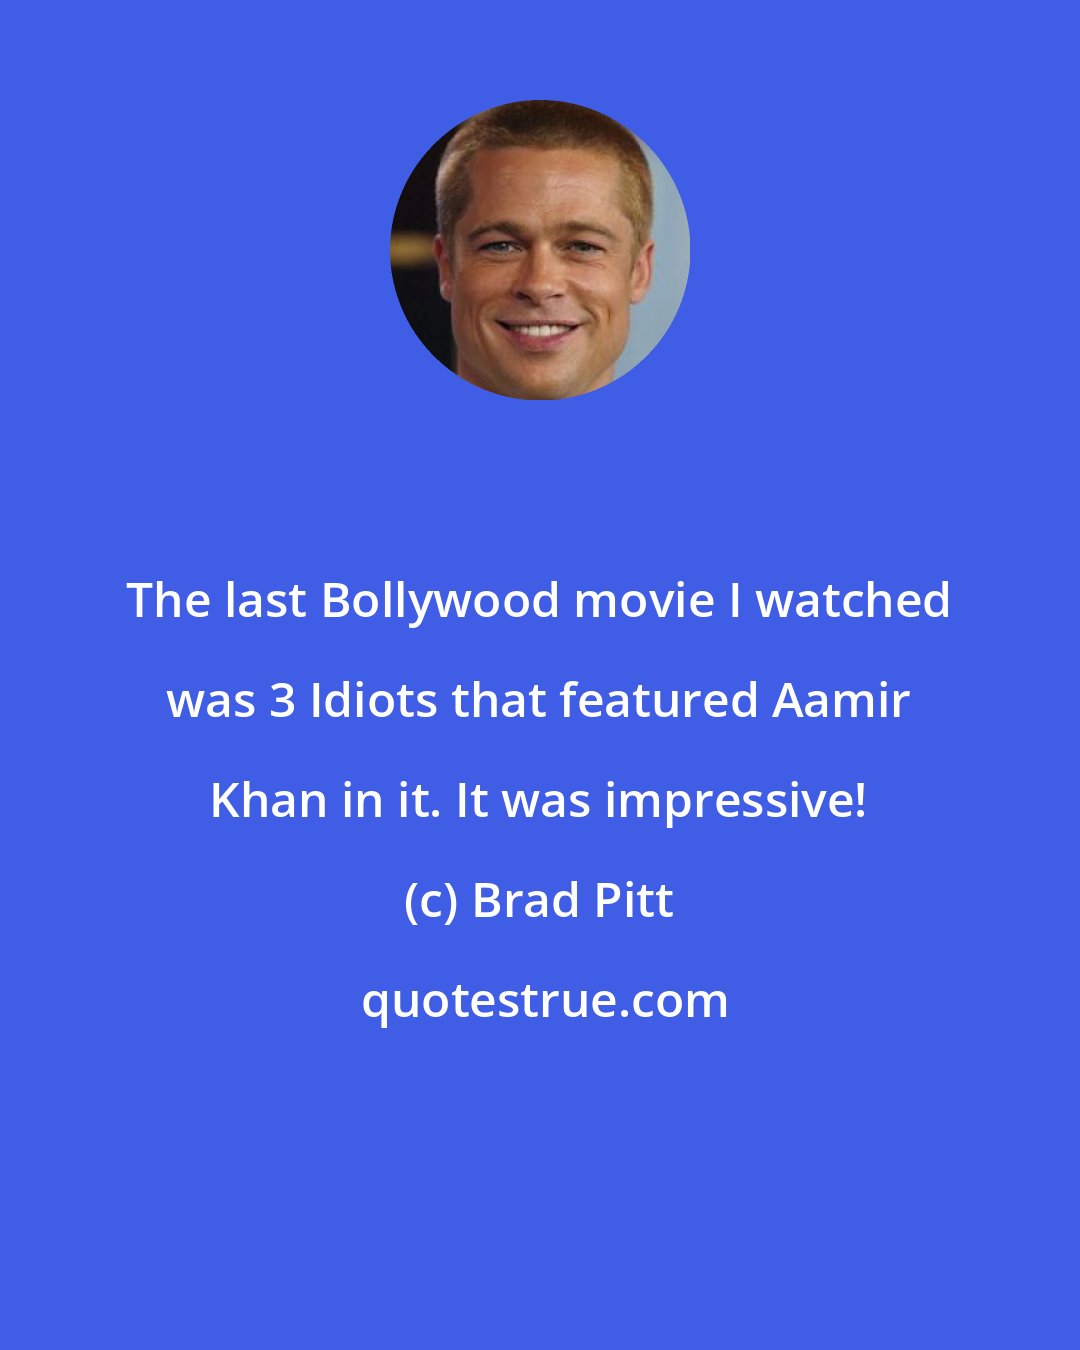 Brad Pitt: The last Bollywood movie I watched was 3 Idiots that featured Aamir Khan in it. It was impressive!